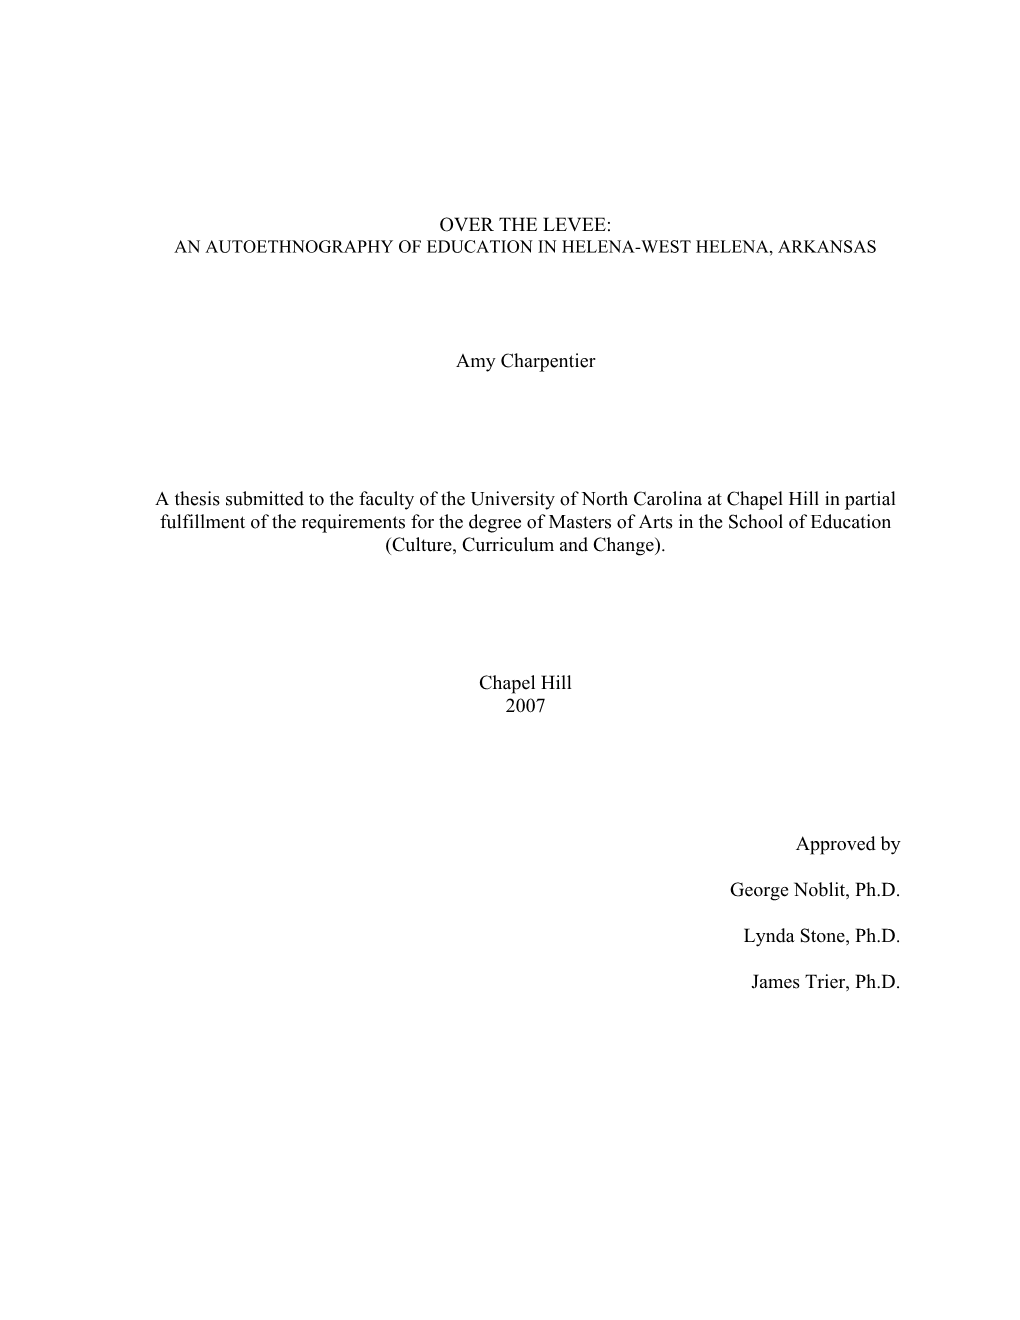 OVER the LEVEE: Amy Charpentier a Thesis Submitted to the Faculty Of